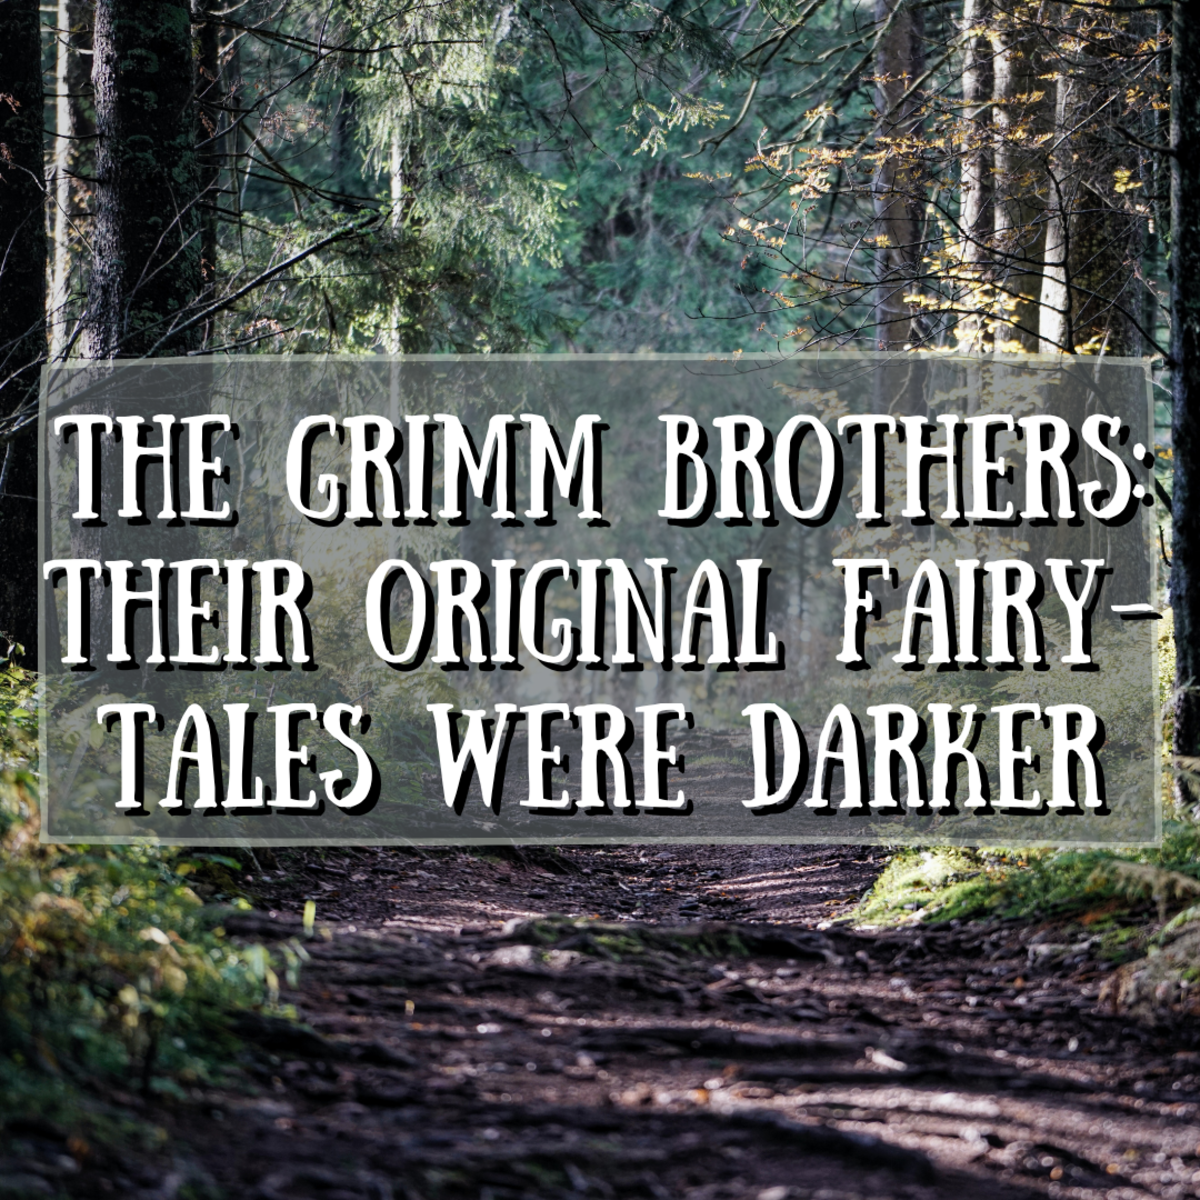 The Grimm Brothers: Their Original Fairy-Tales Were Darker